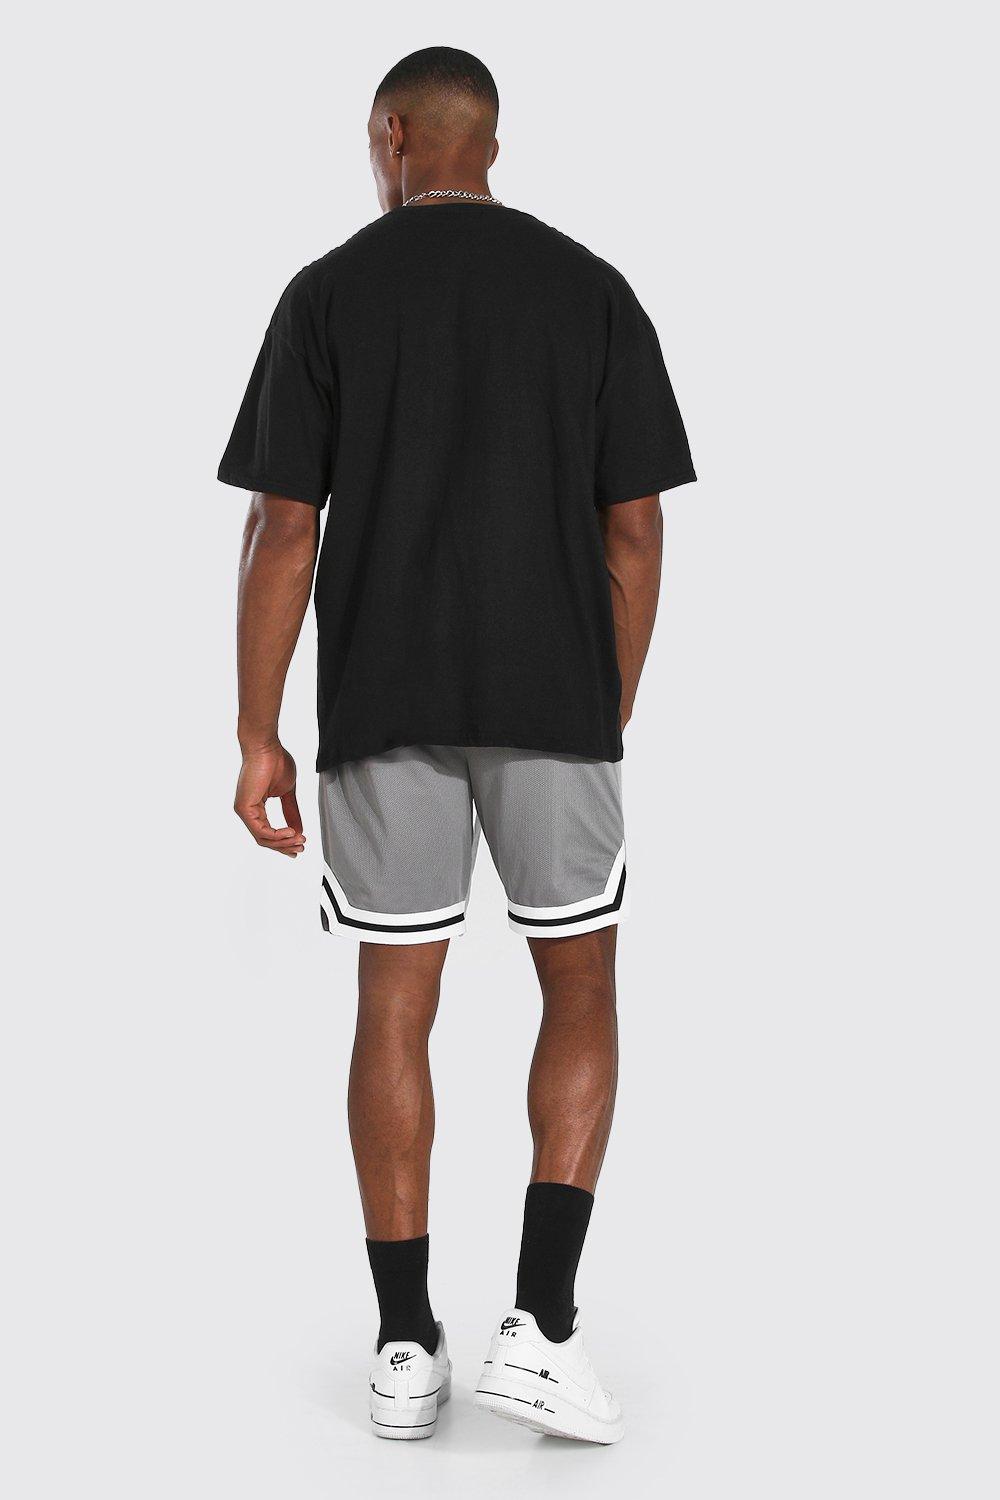 Charcoal Mesh Basketball Shorts With Tape